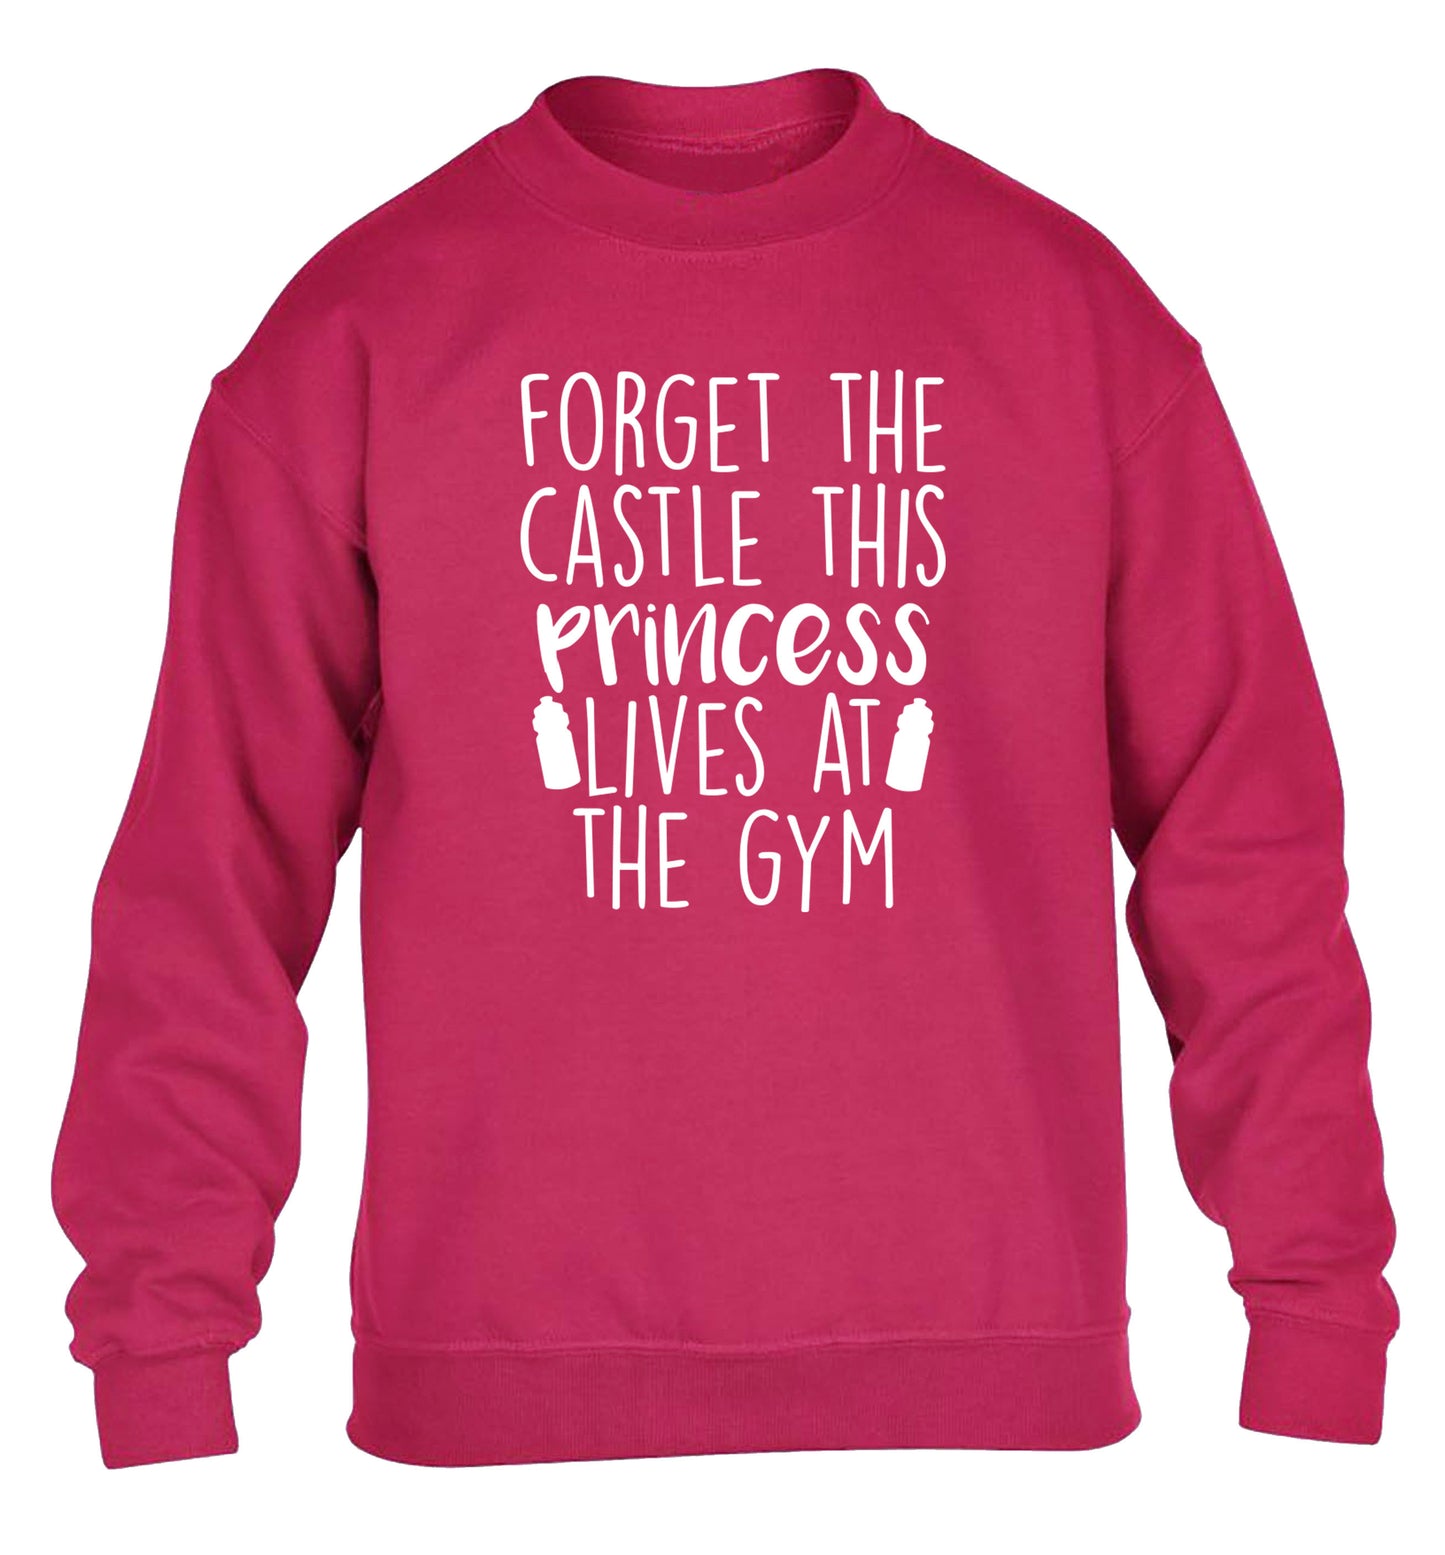 Forget the castle this princess lives at the gym children's pink sweater 12-14 Years